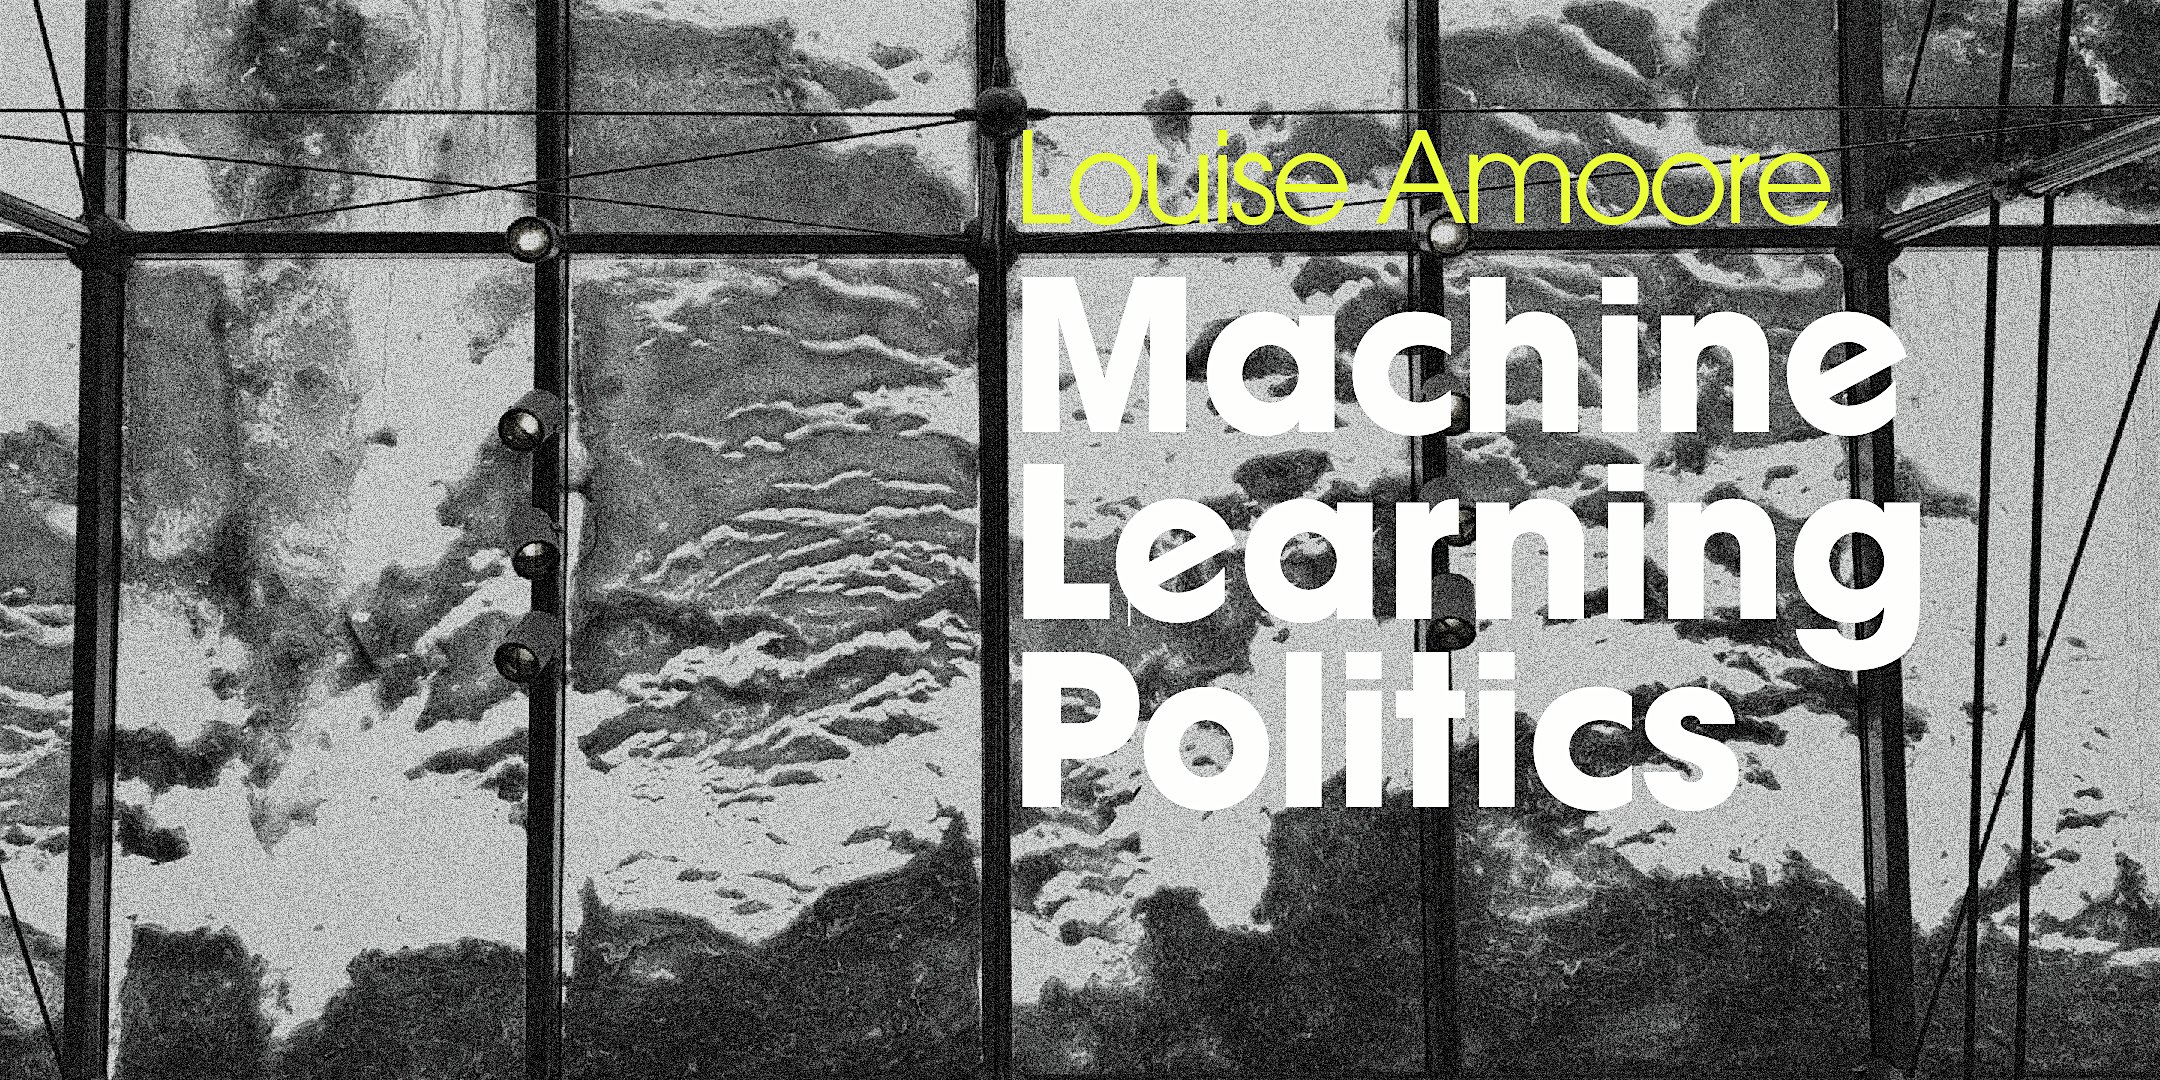 Dr. Louise Amoore Lecture on Machine Learning Politics